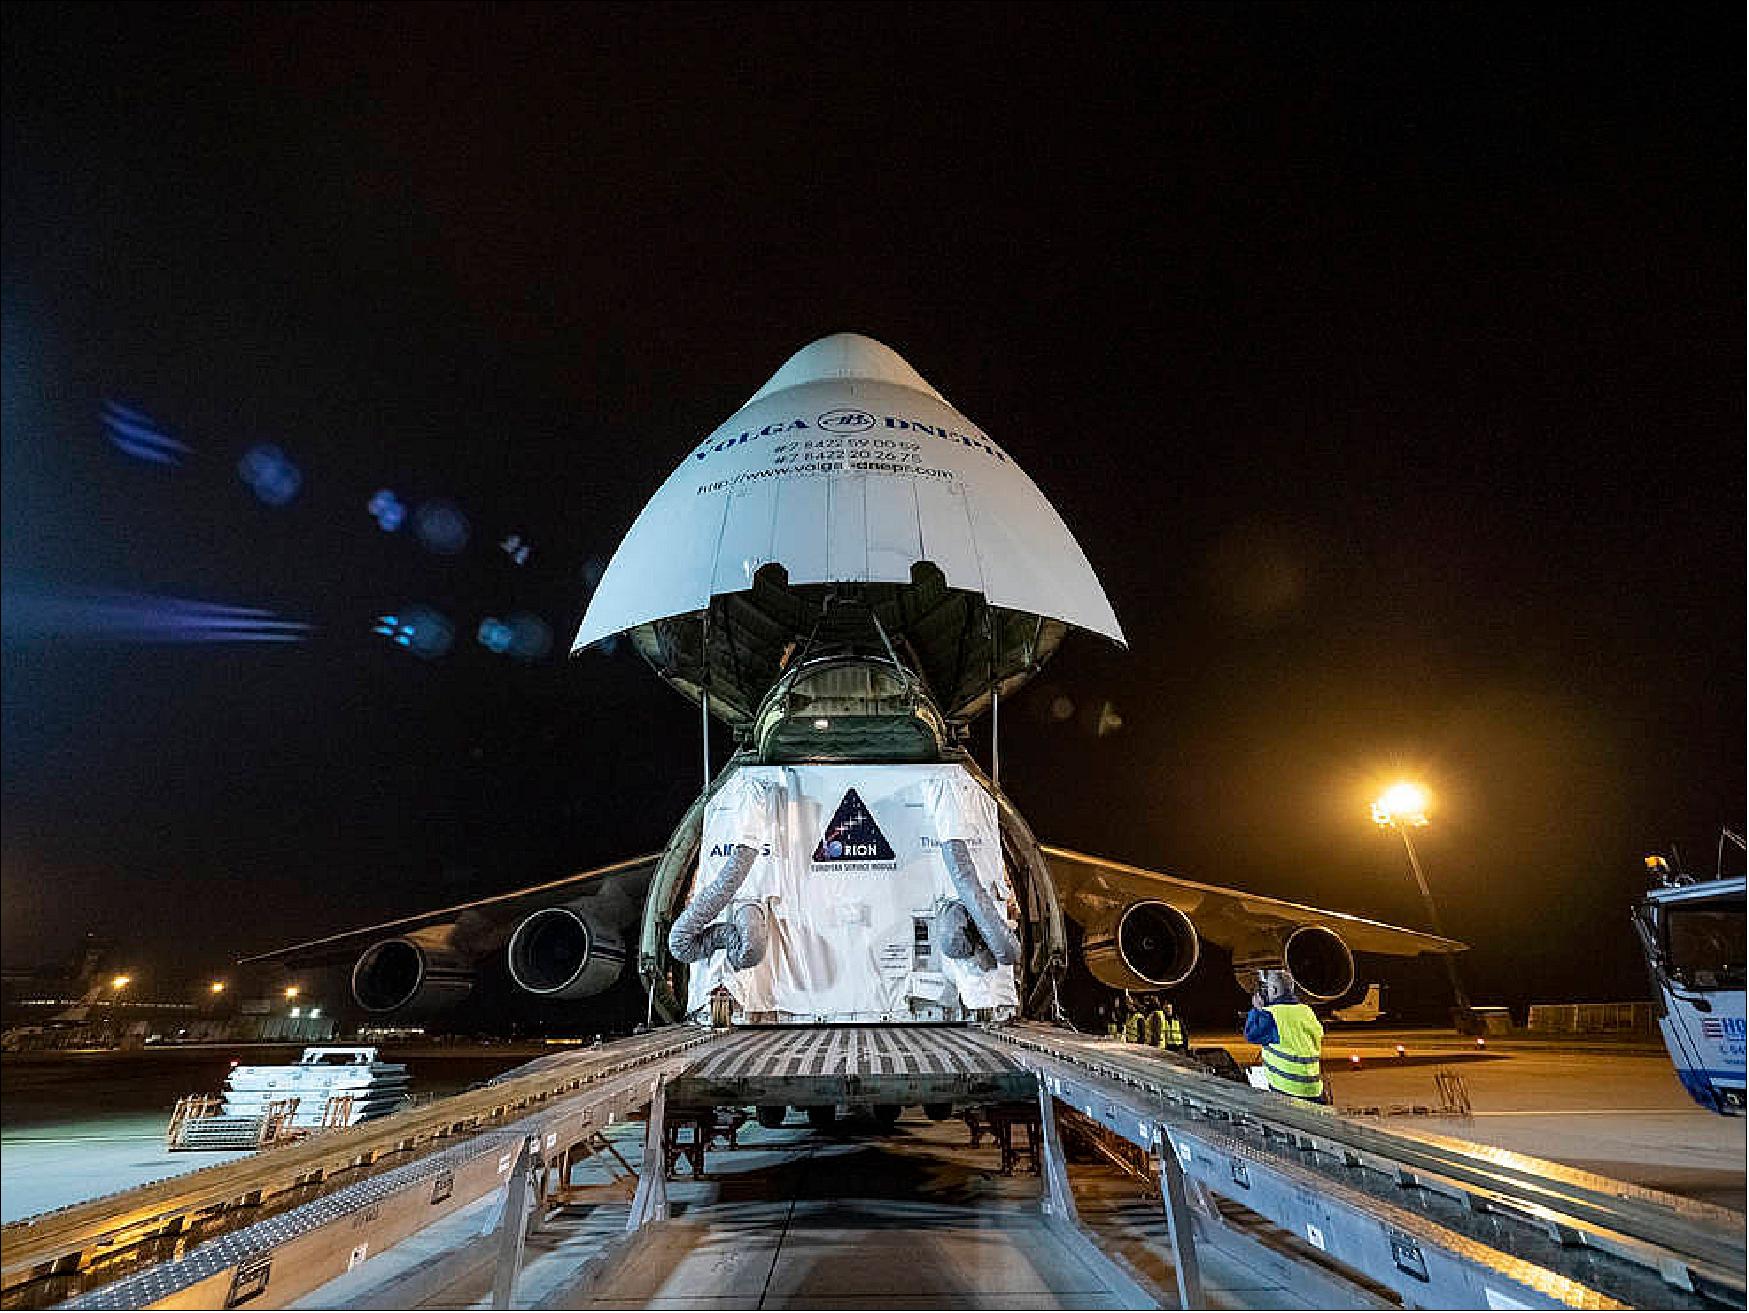 Figure 58: The European Service Module for NASA's Orion spacecraft was loaded on an Antonov airplane in Bremen, Germany, on Nov. 5, 2018, for transport to NASA's Kennedy Space Center in Florida. For the first time, NASA will use a European-built system as a critical element to power an American spacecraft, extending the international cooperation of the International Space Station into deep space (image credit: NASA/Rad Sinyak)